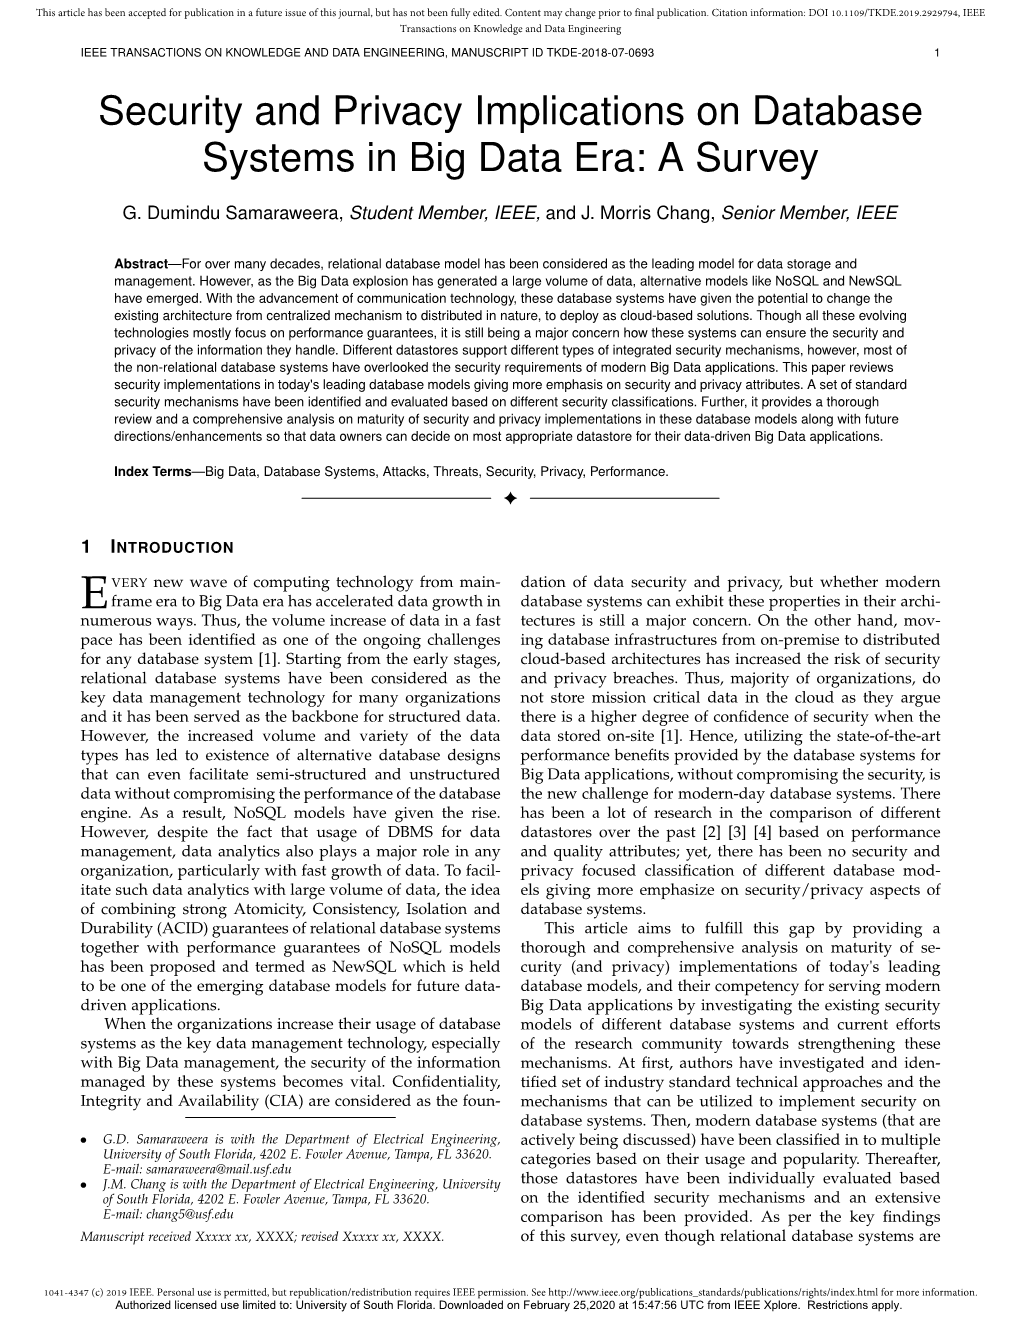 Security and Privacy Implications on Database Systems in Big Data Era: a Survey